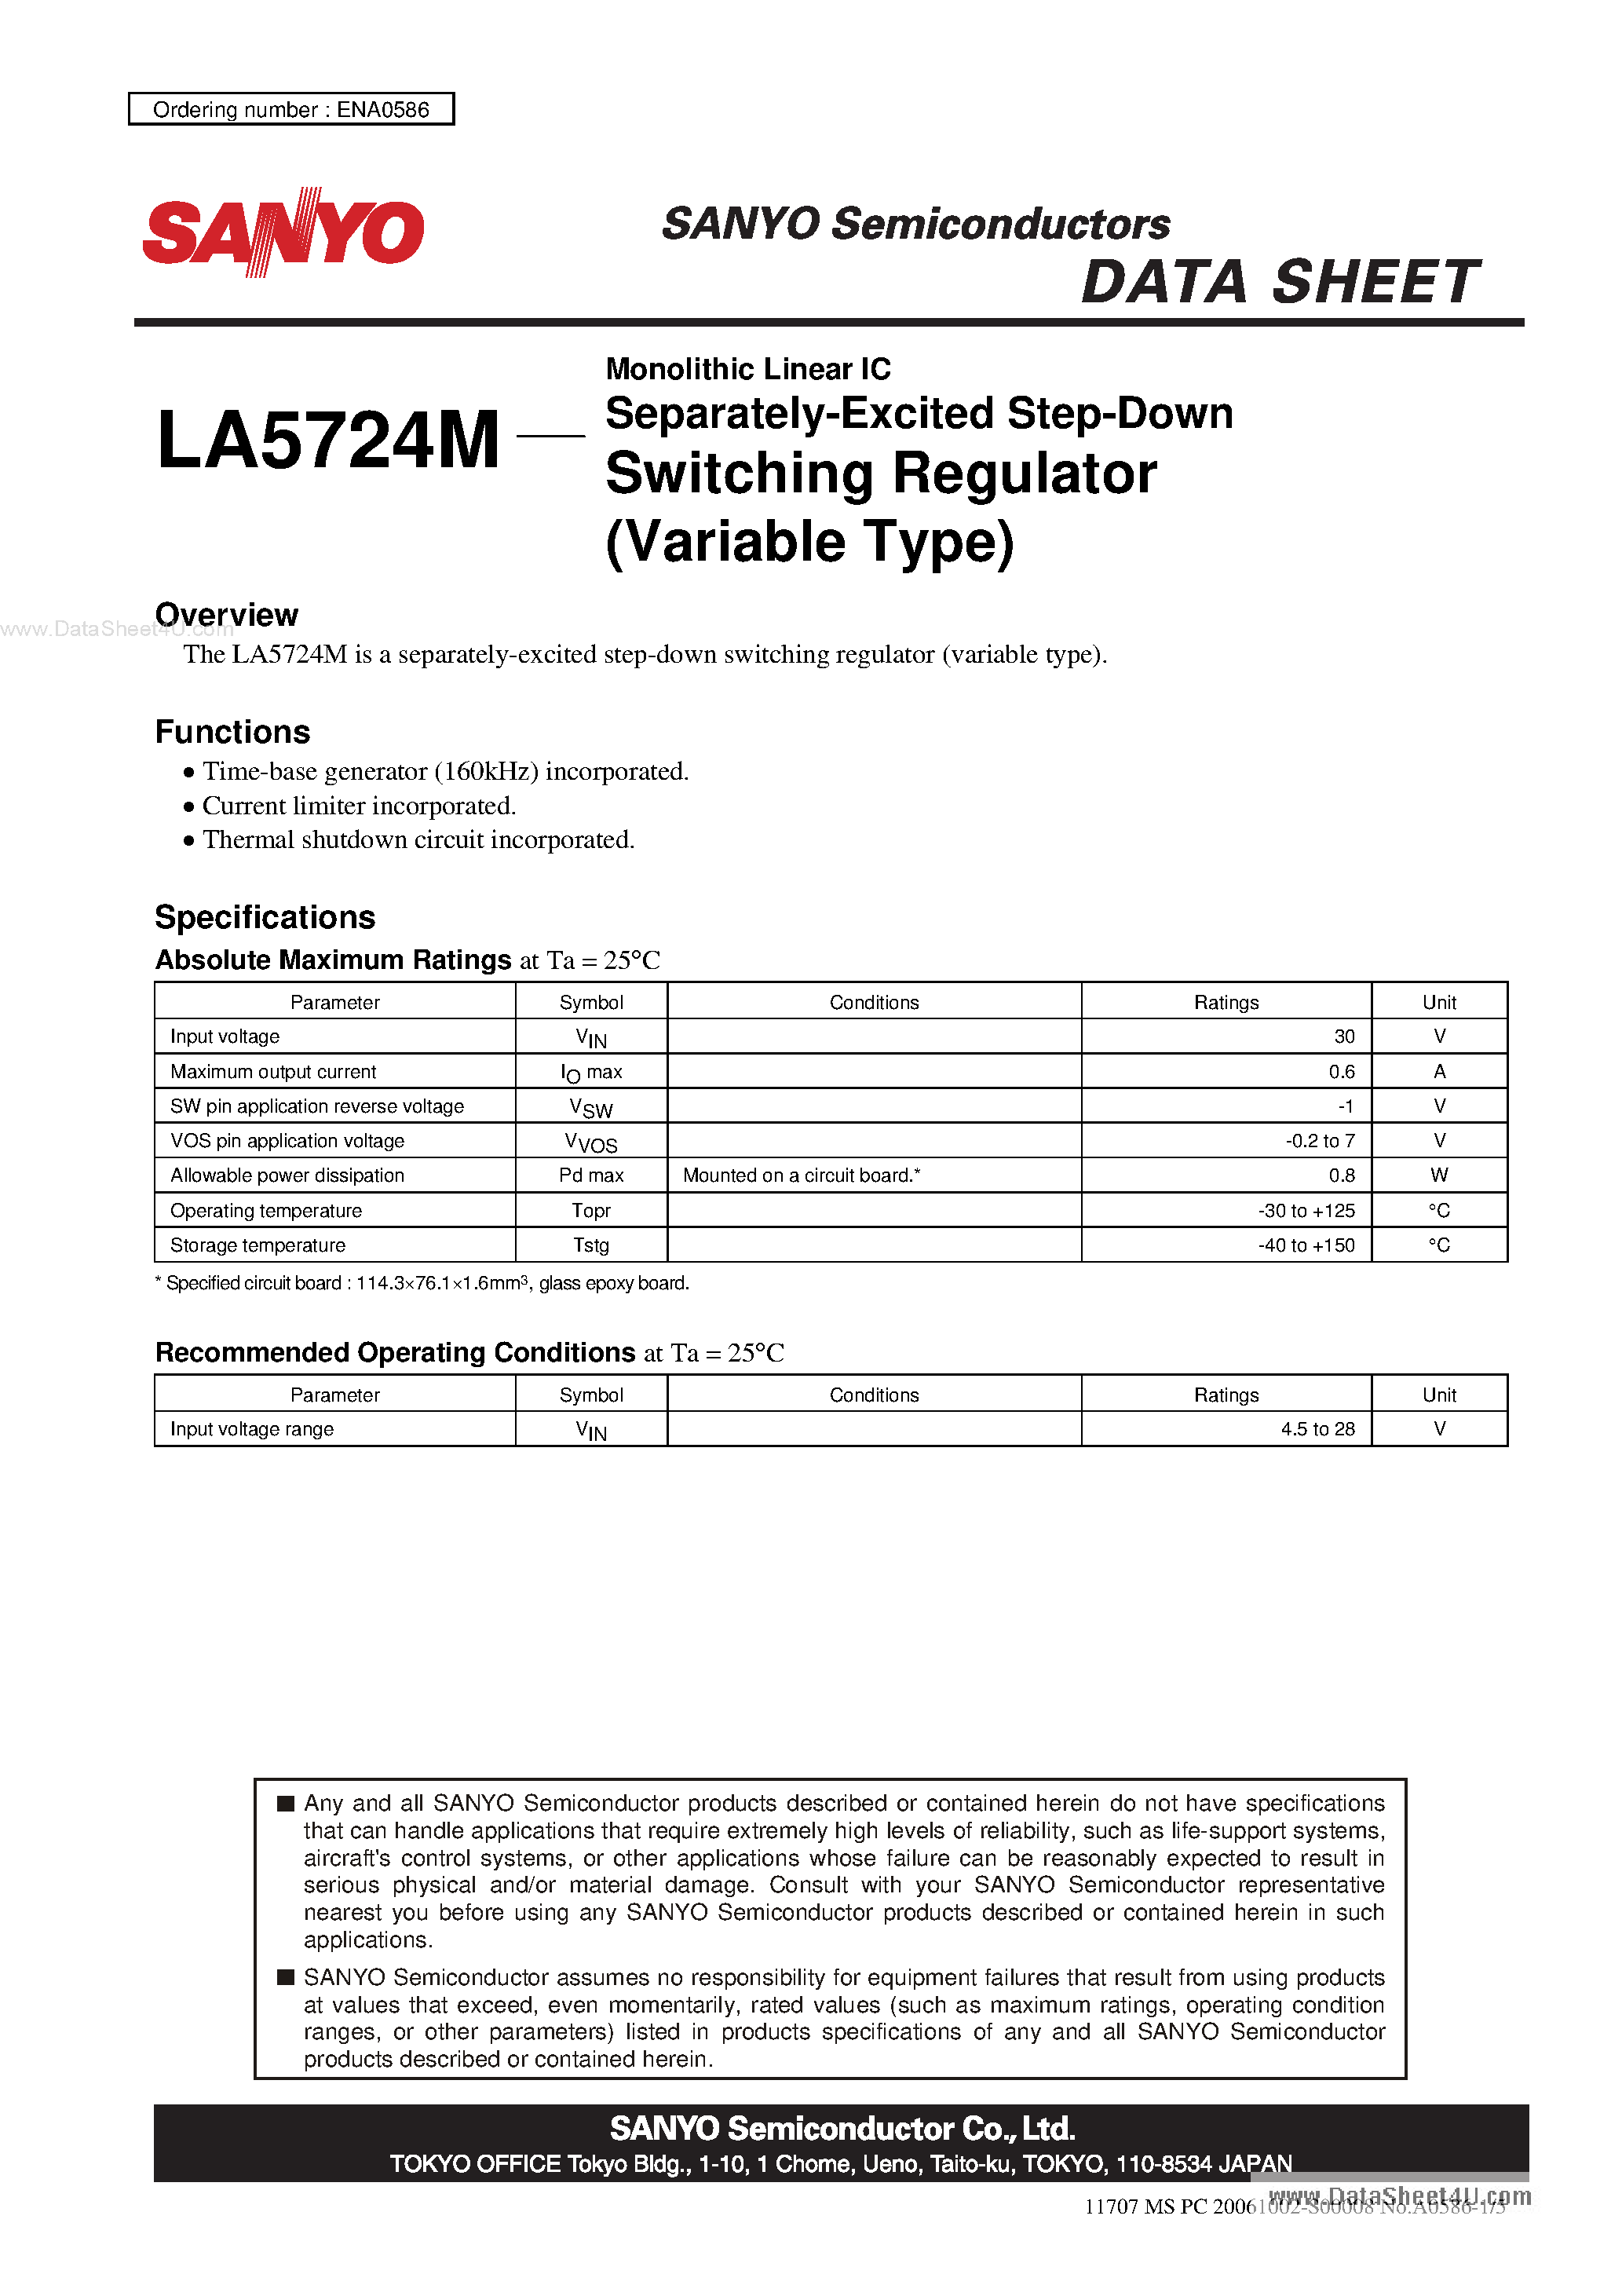 Datasheet LA5724M - Monolithic Linear IC Separately-Excited Step-Down Switching Regulator page 1